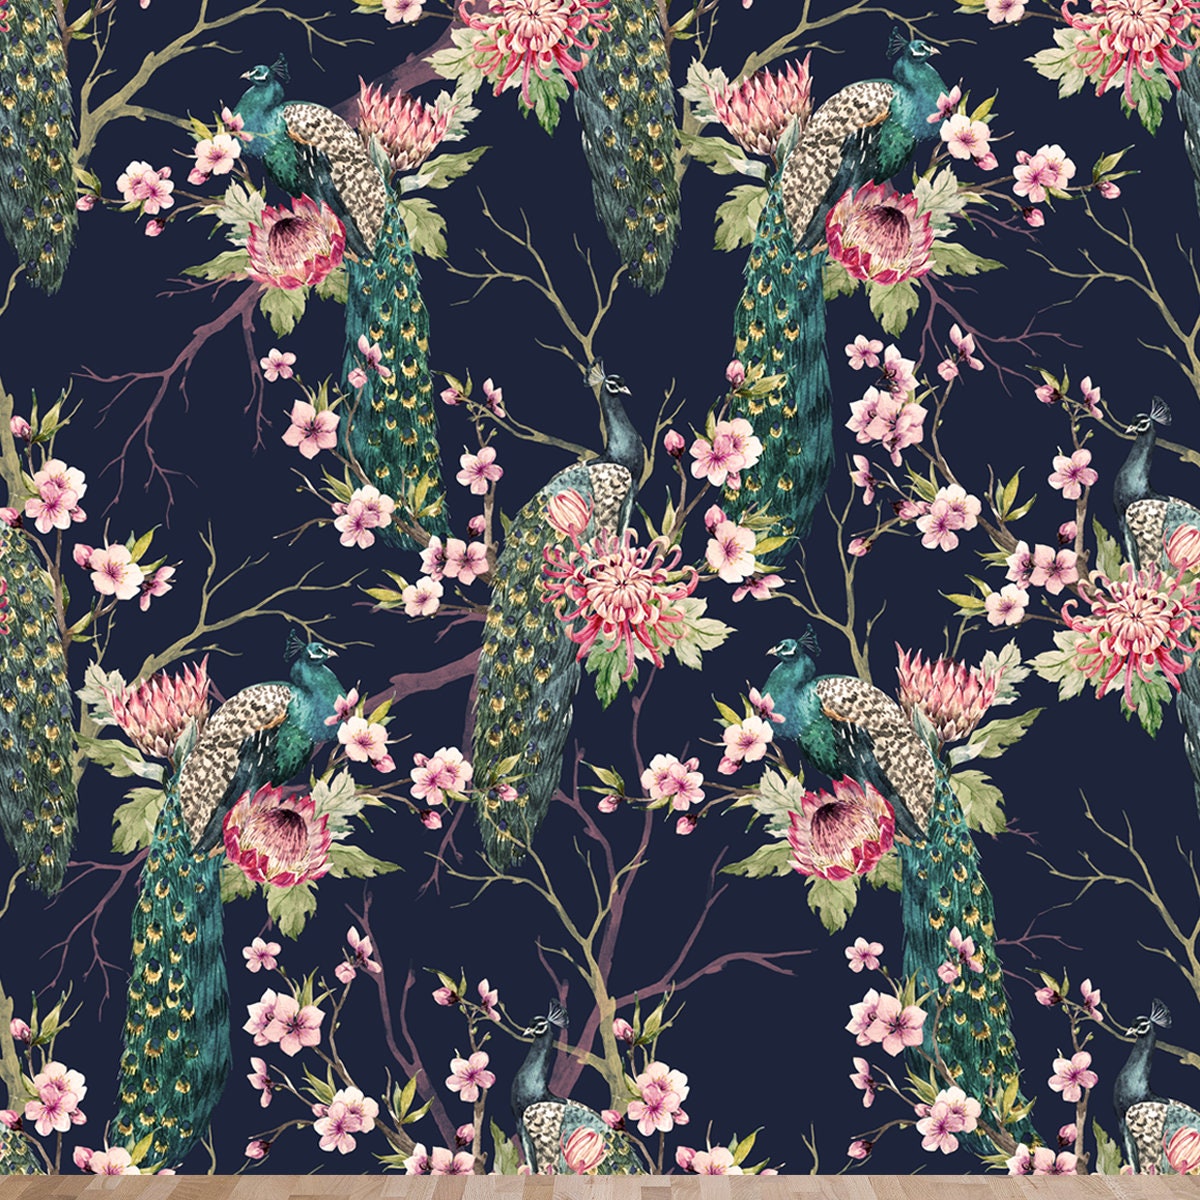 Watercolor Pattern Peacock on a Cherry Tree, Flowering Trees. Protea Flower, Retro Colors Wallpaper Living Room Mural